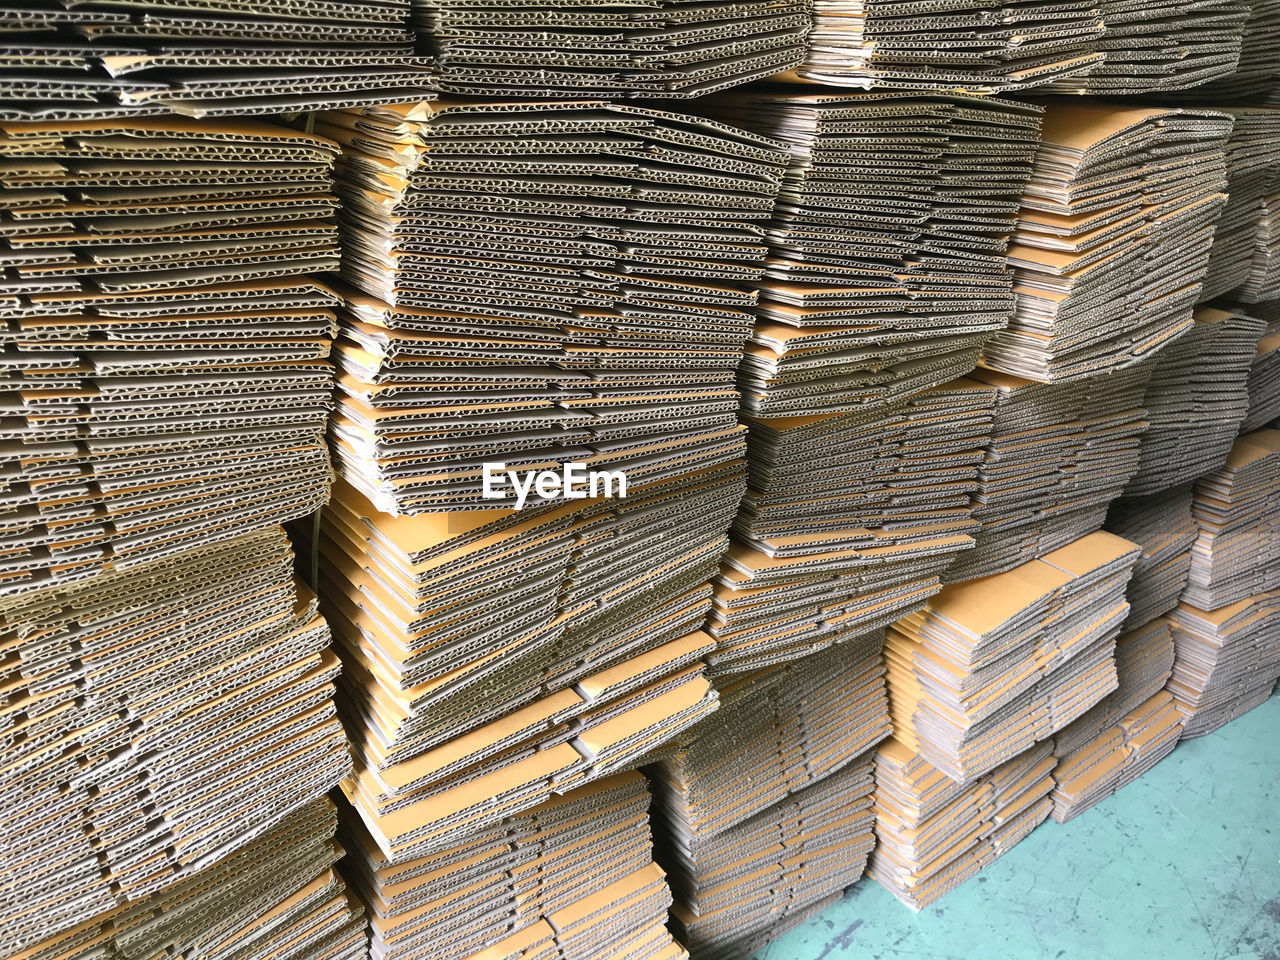 Cardboard sheets stacked in warehouse